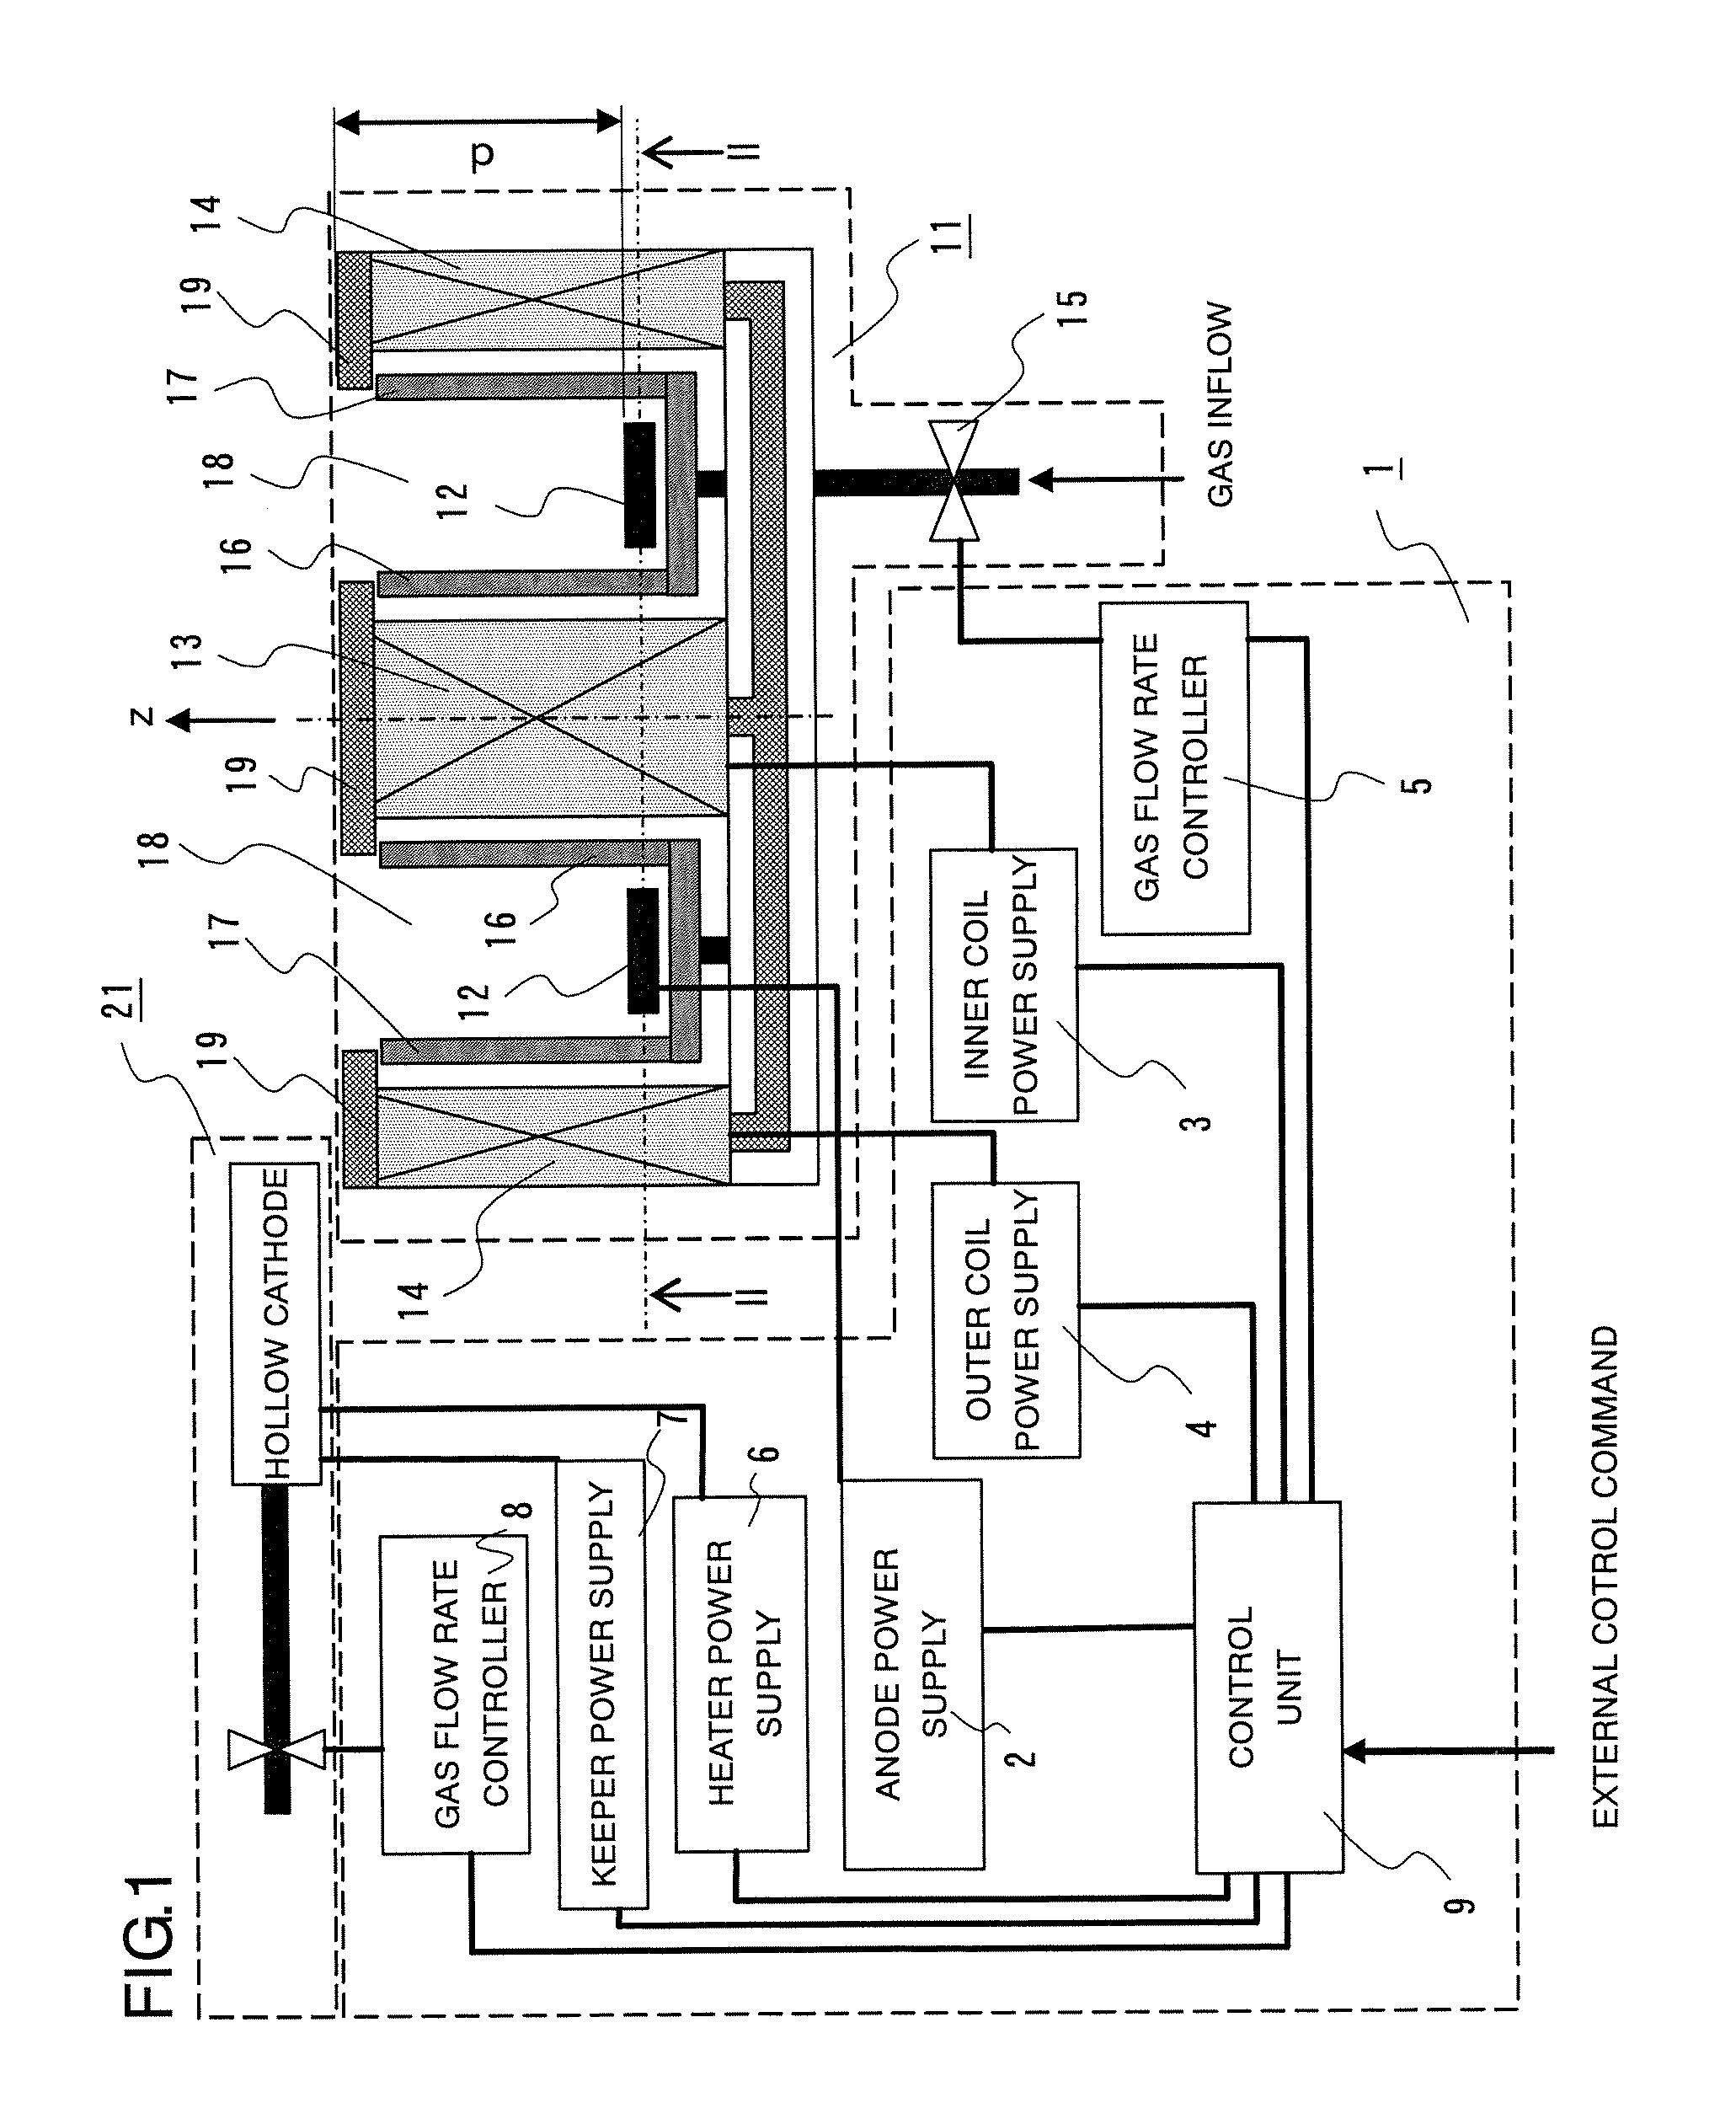 Power supply apparatus for ion accelerator